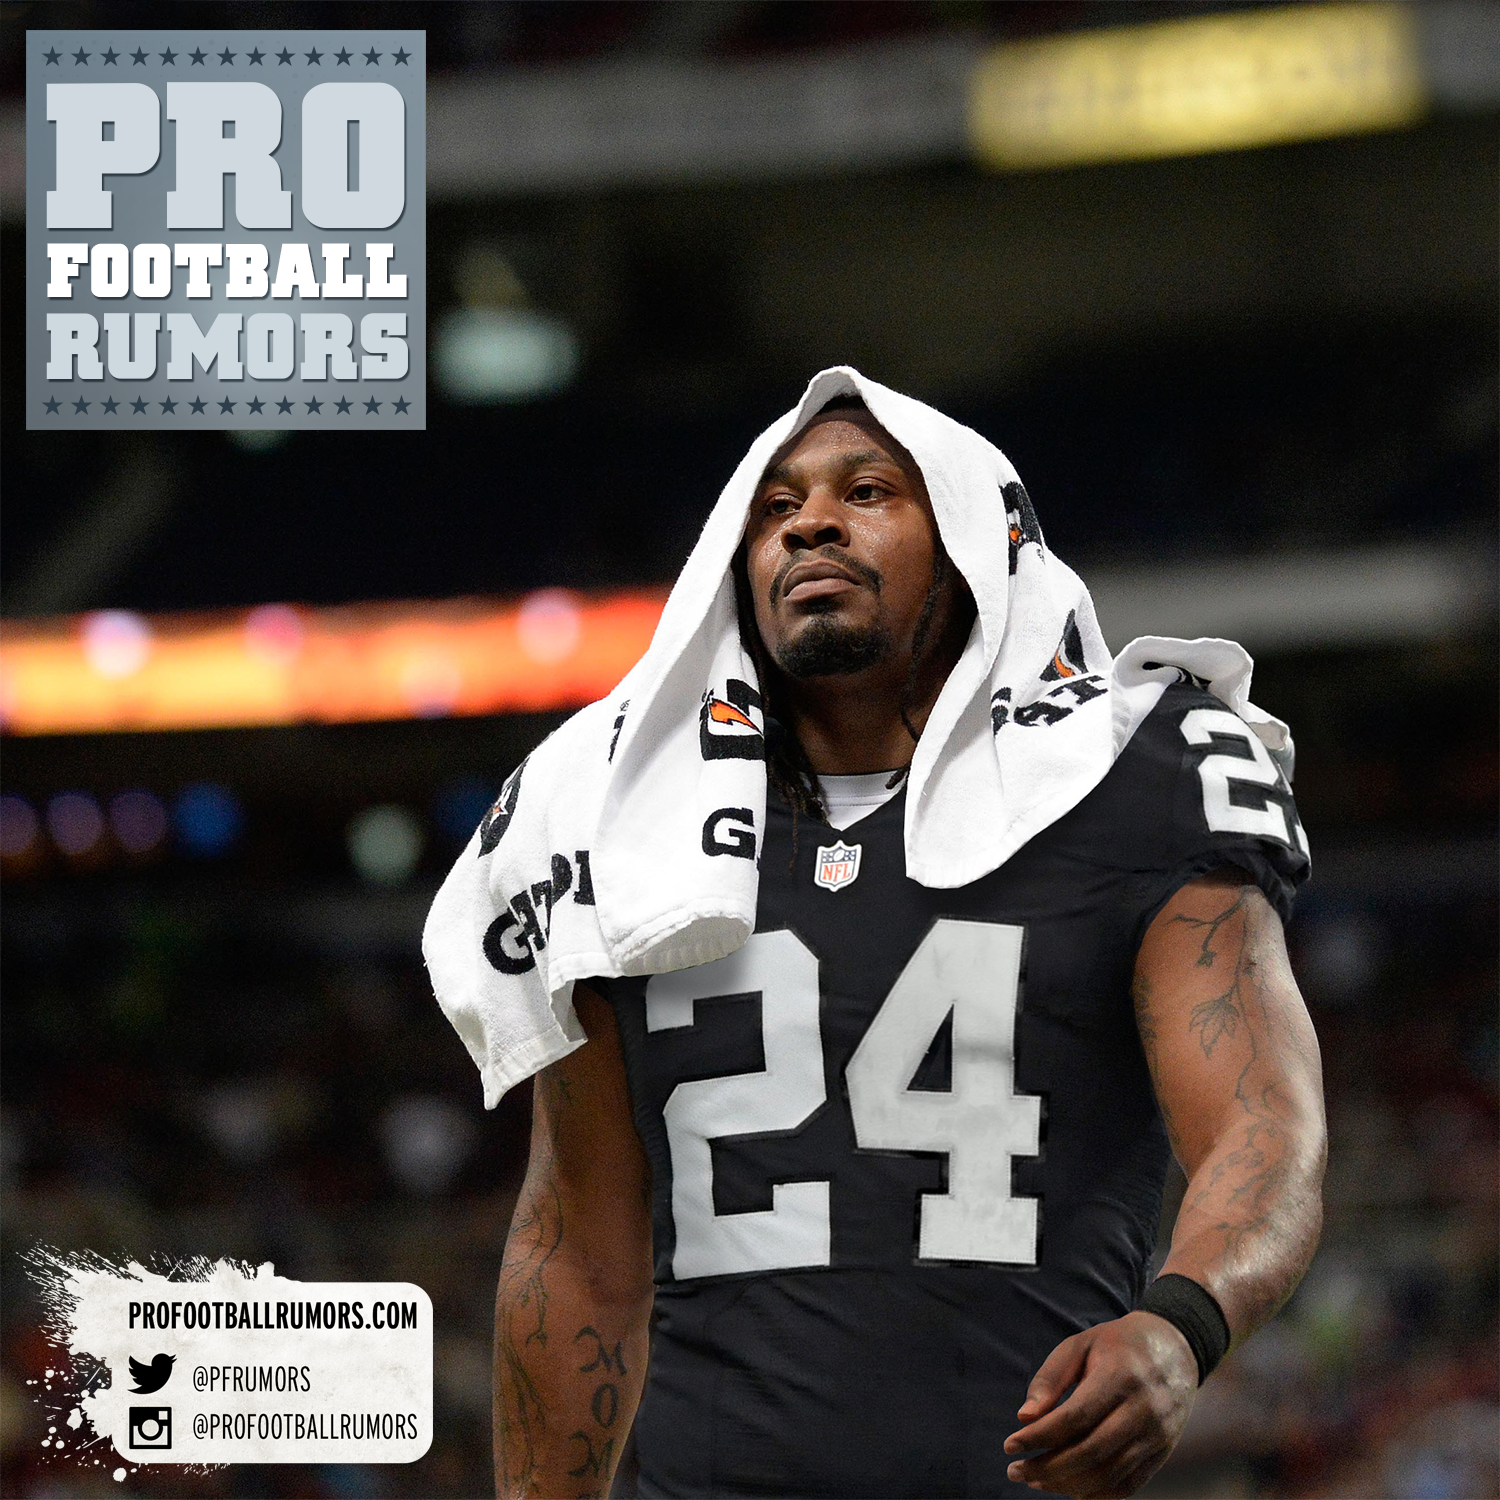 Raiders: Marshawn Lynch's jersey ranks No. 1 in NFL in May